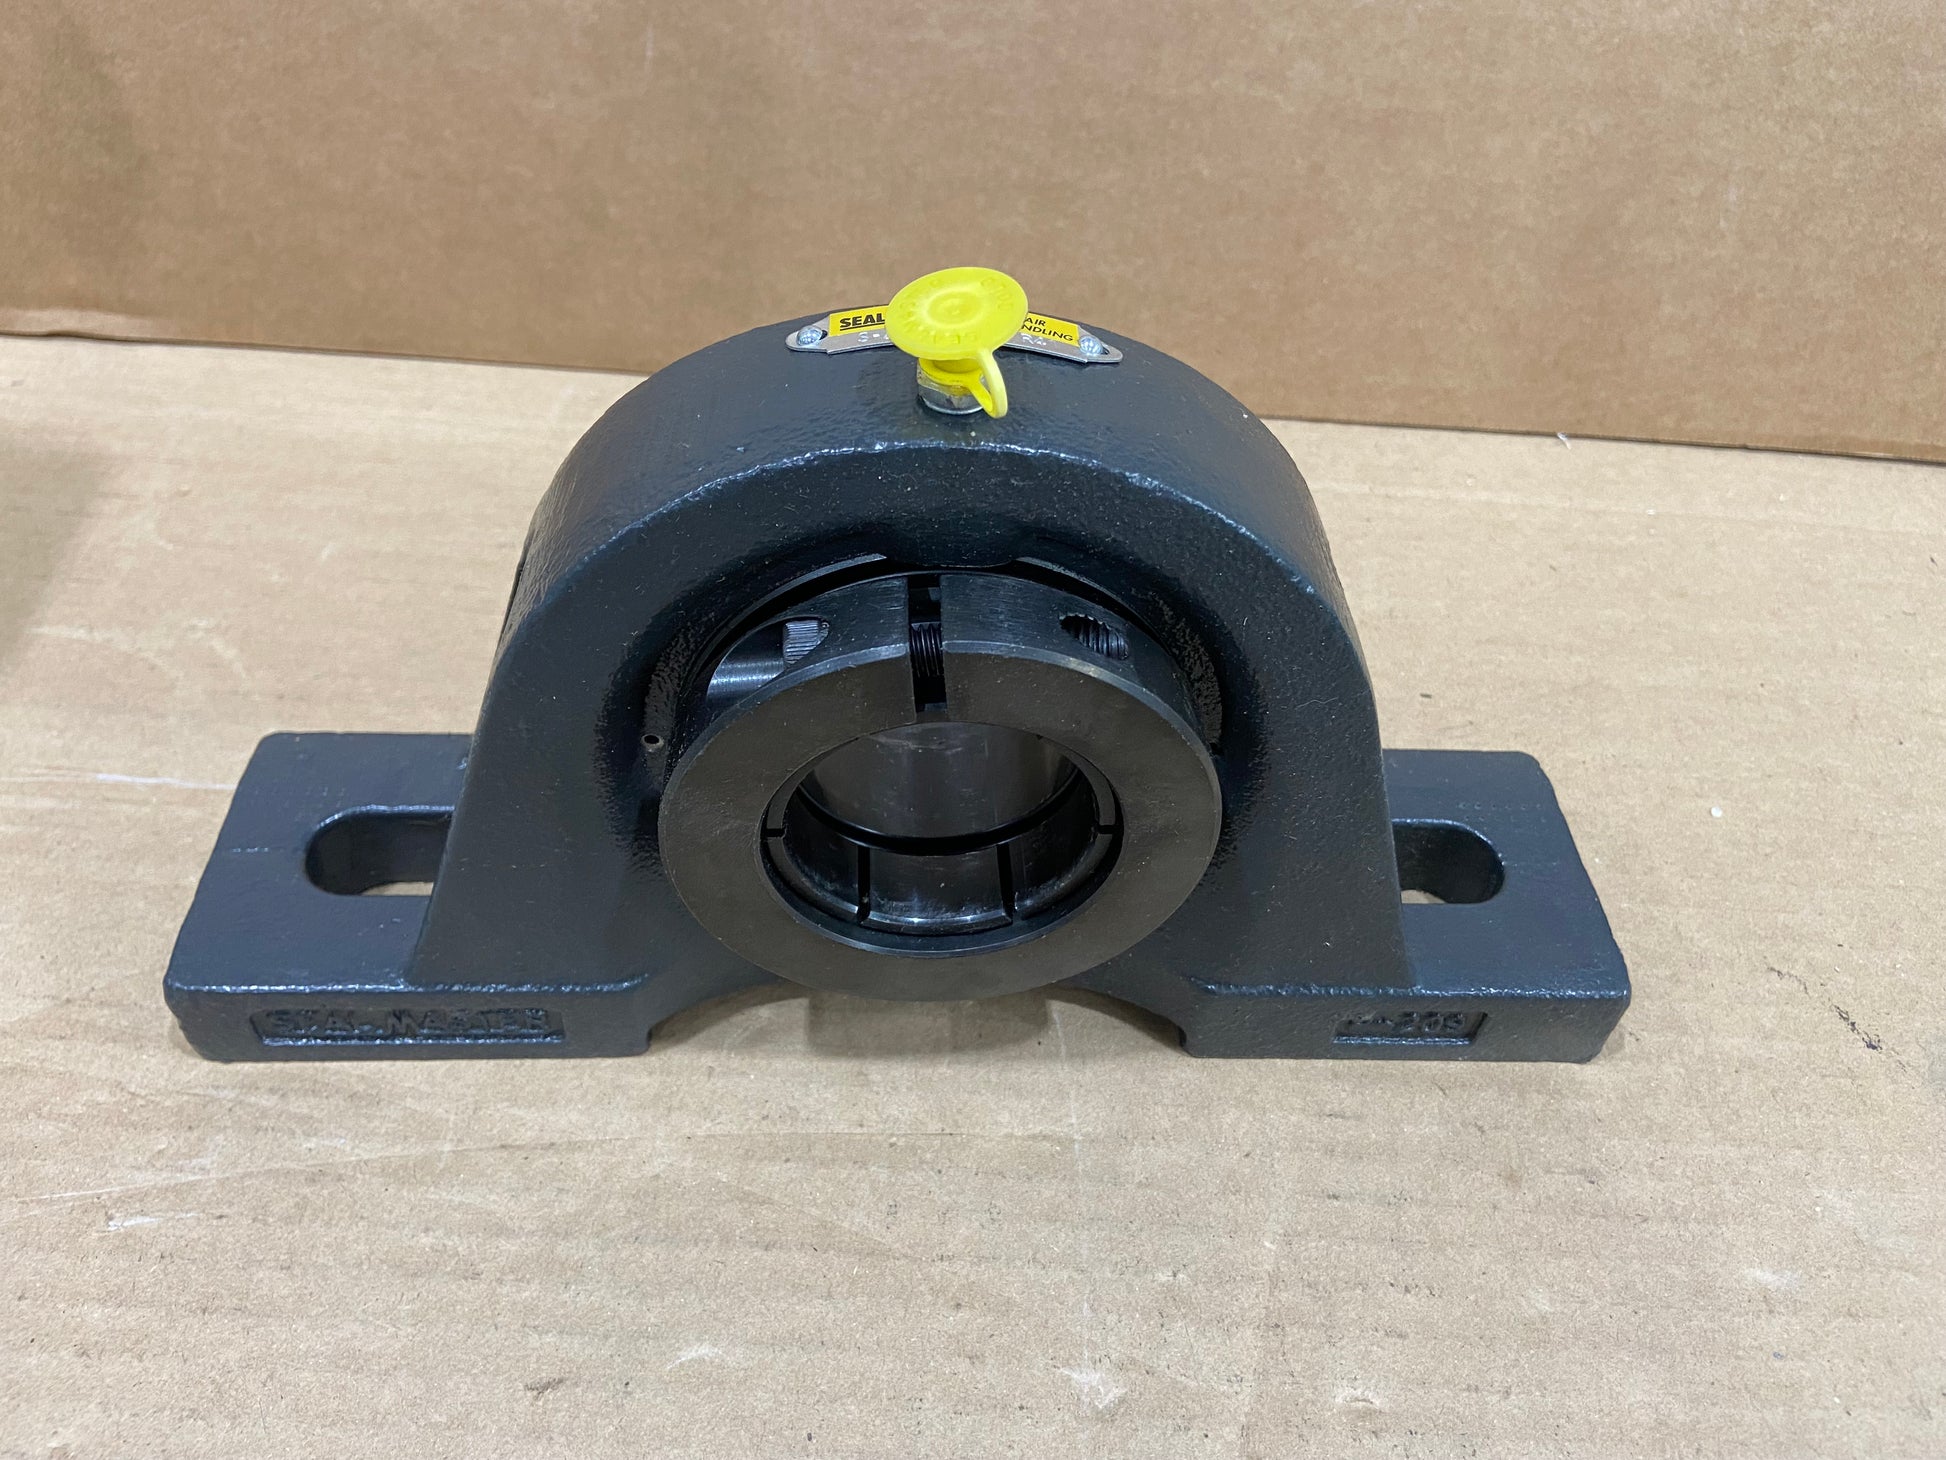 STANDARD DUTY BEARING WITH CAST IRON HOUSING 1 15/16" BORE